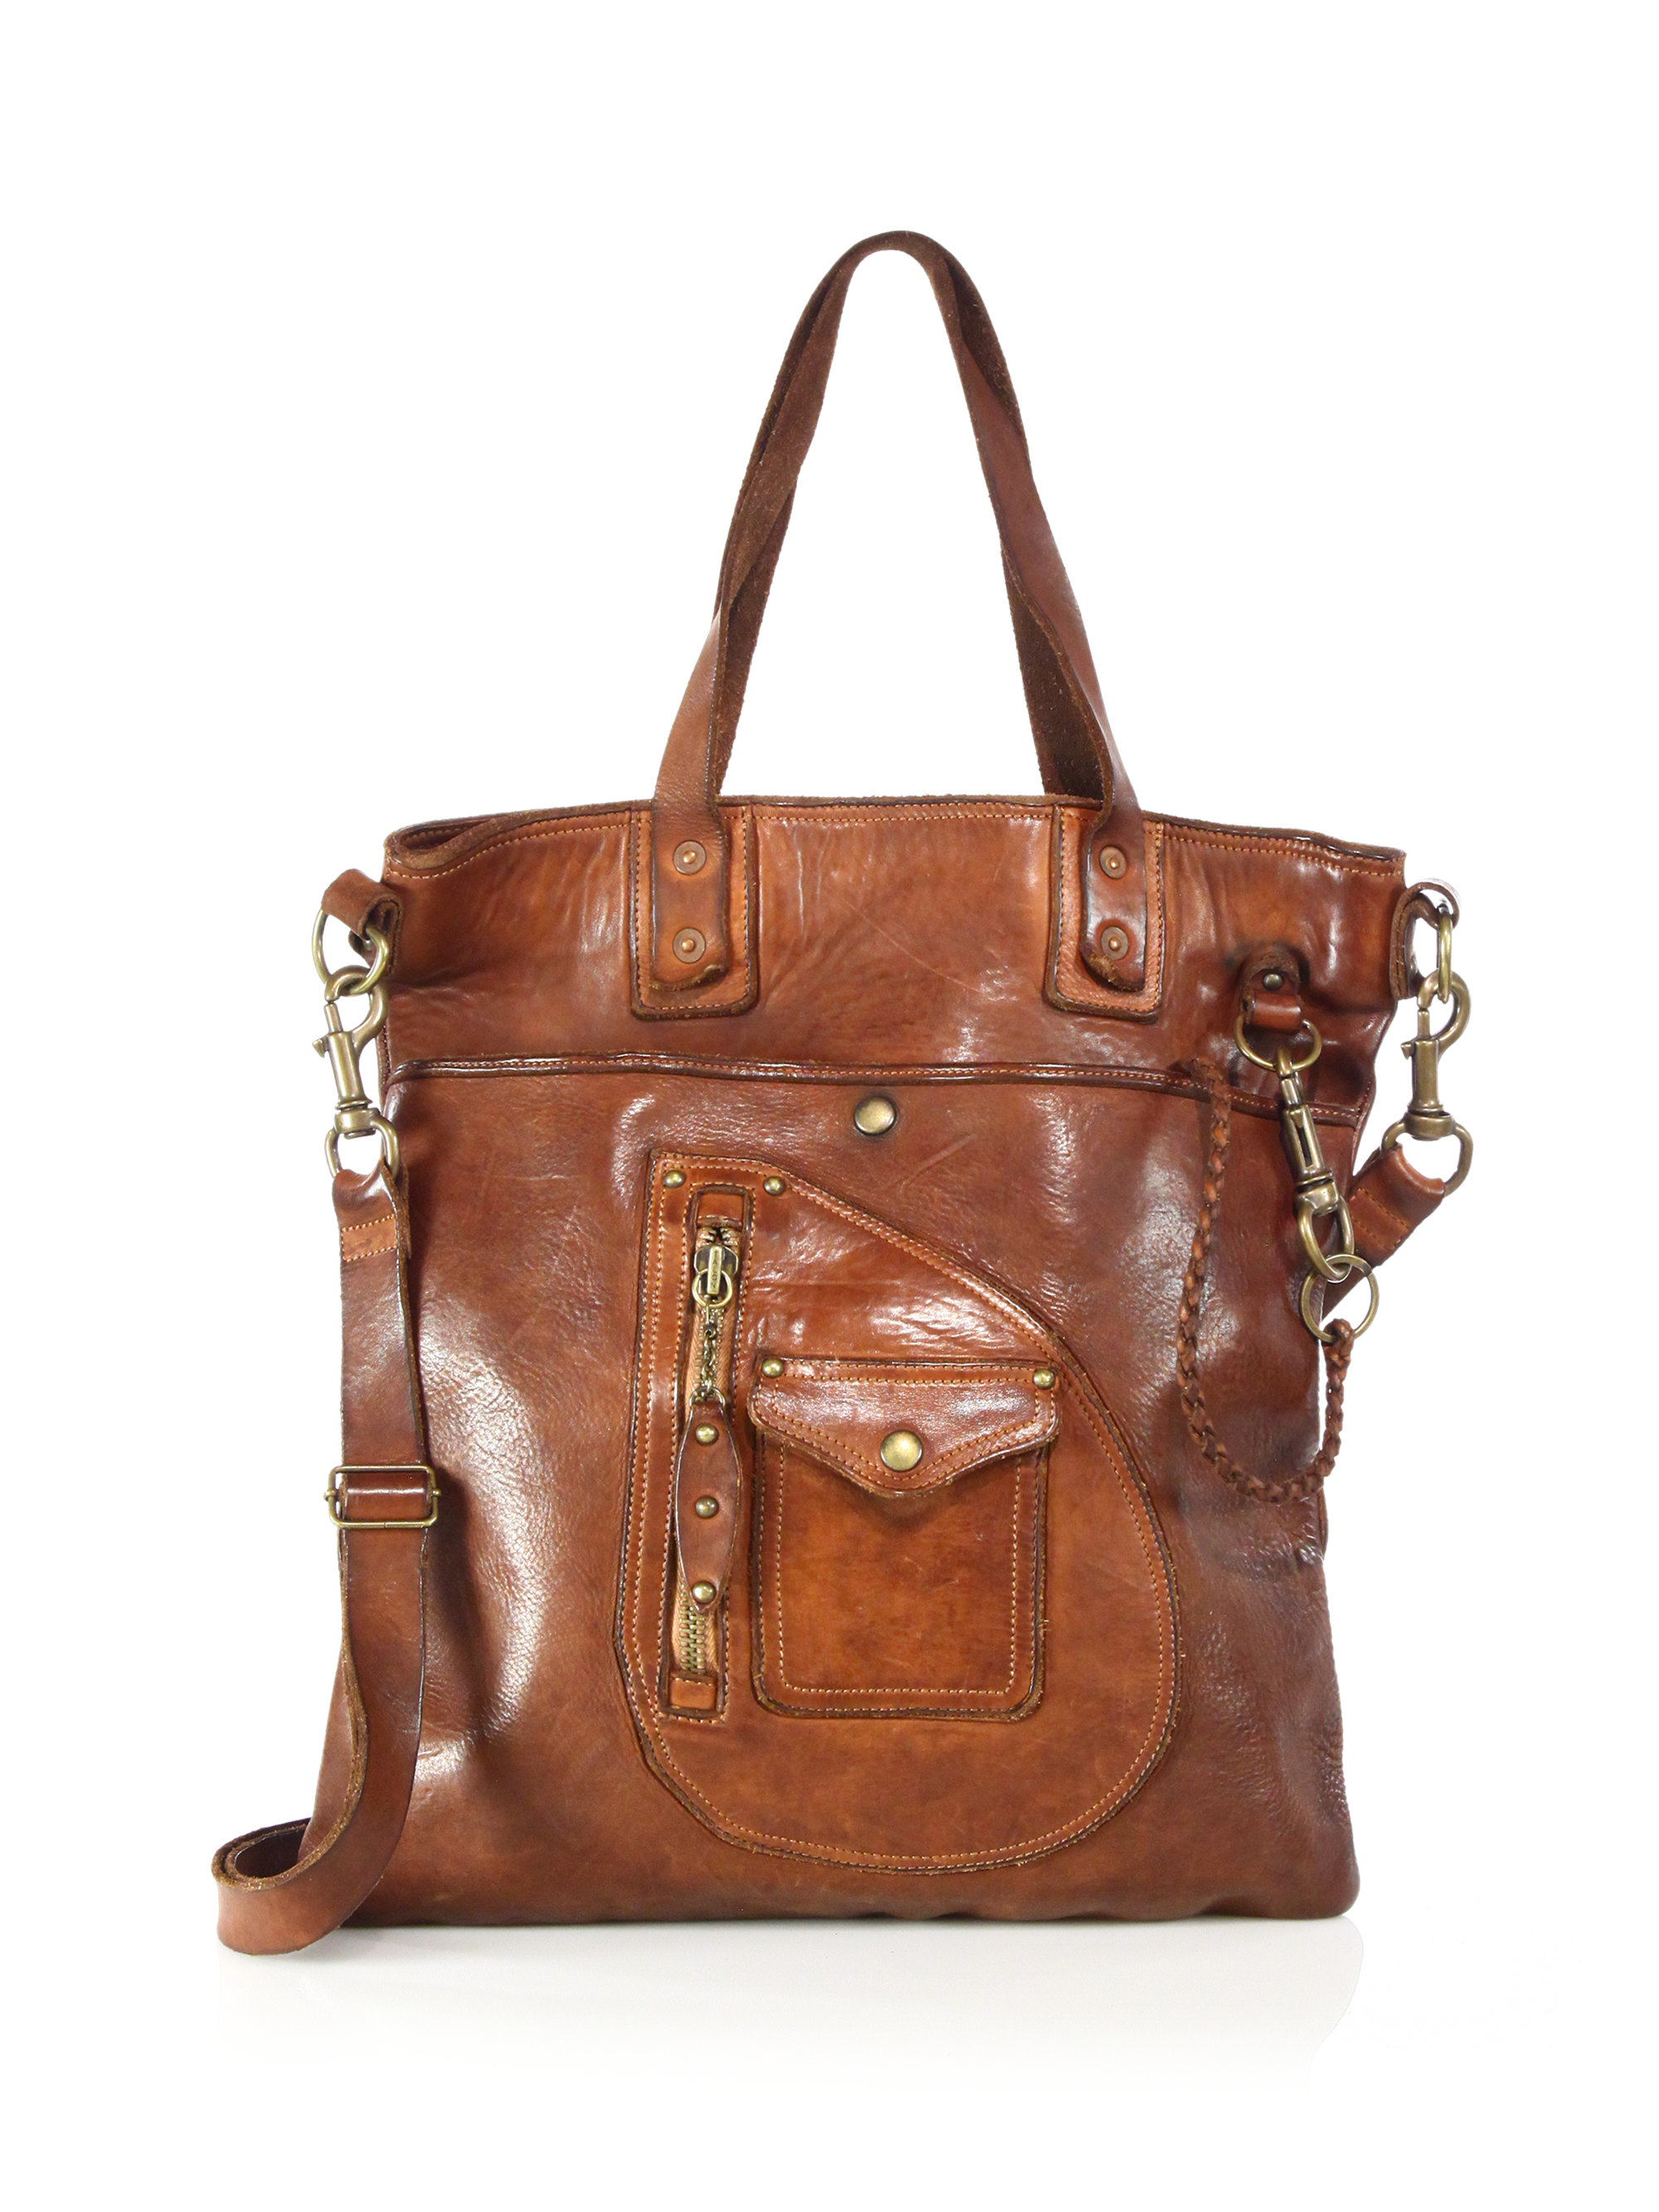 Lyst - Polo Ralph Lauren Leather Tote in Brown for Men